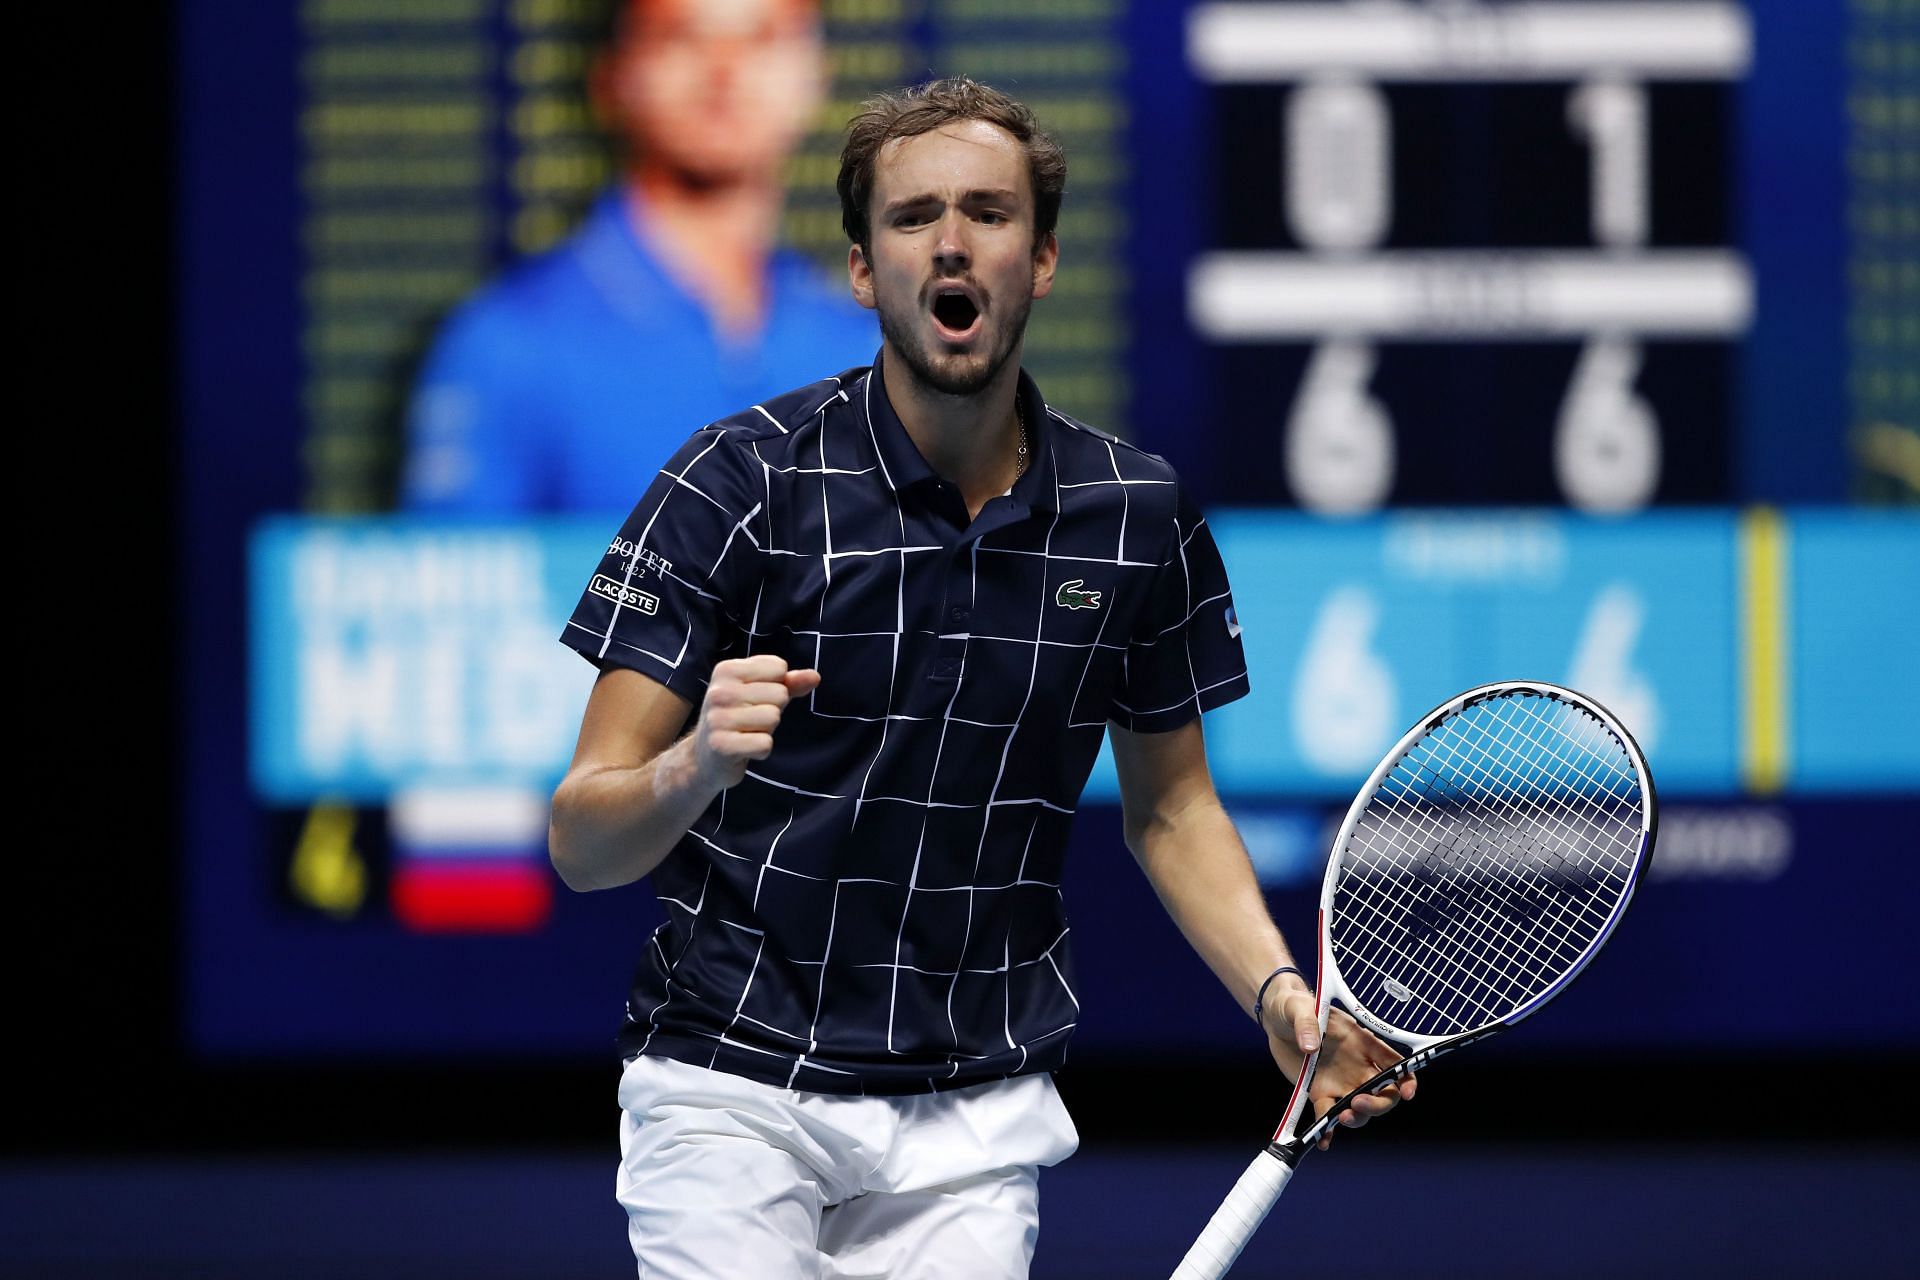 Daniil Medvedev at the 2020 Nitto ATP World Tour Finals - Day Seven.